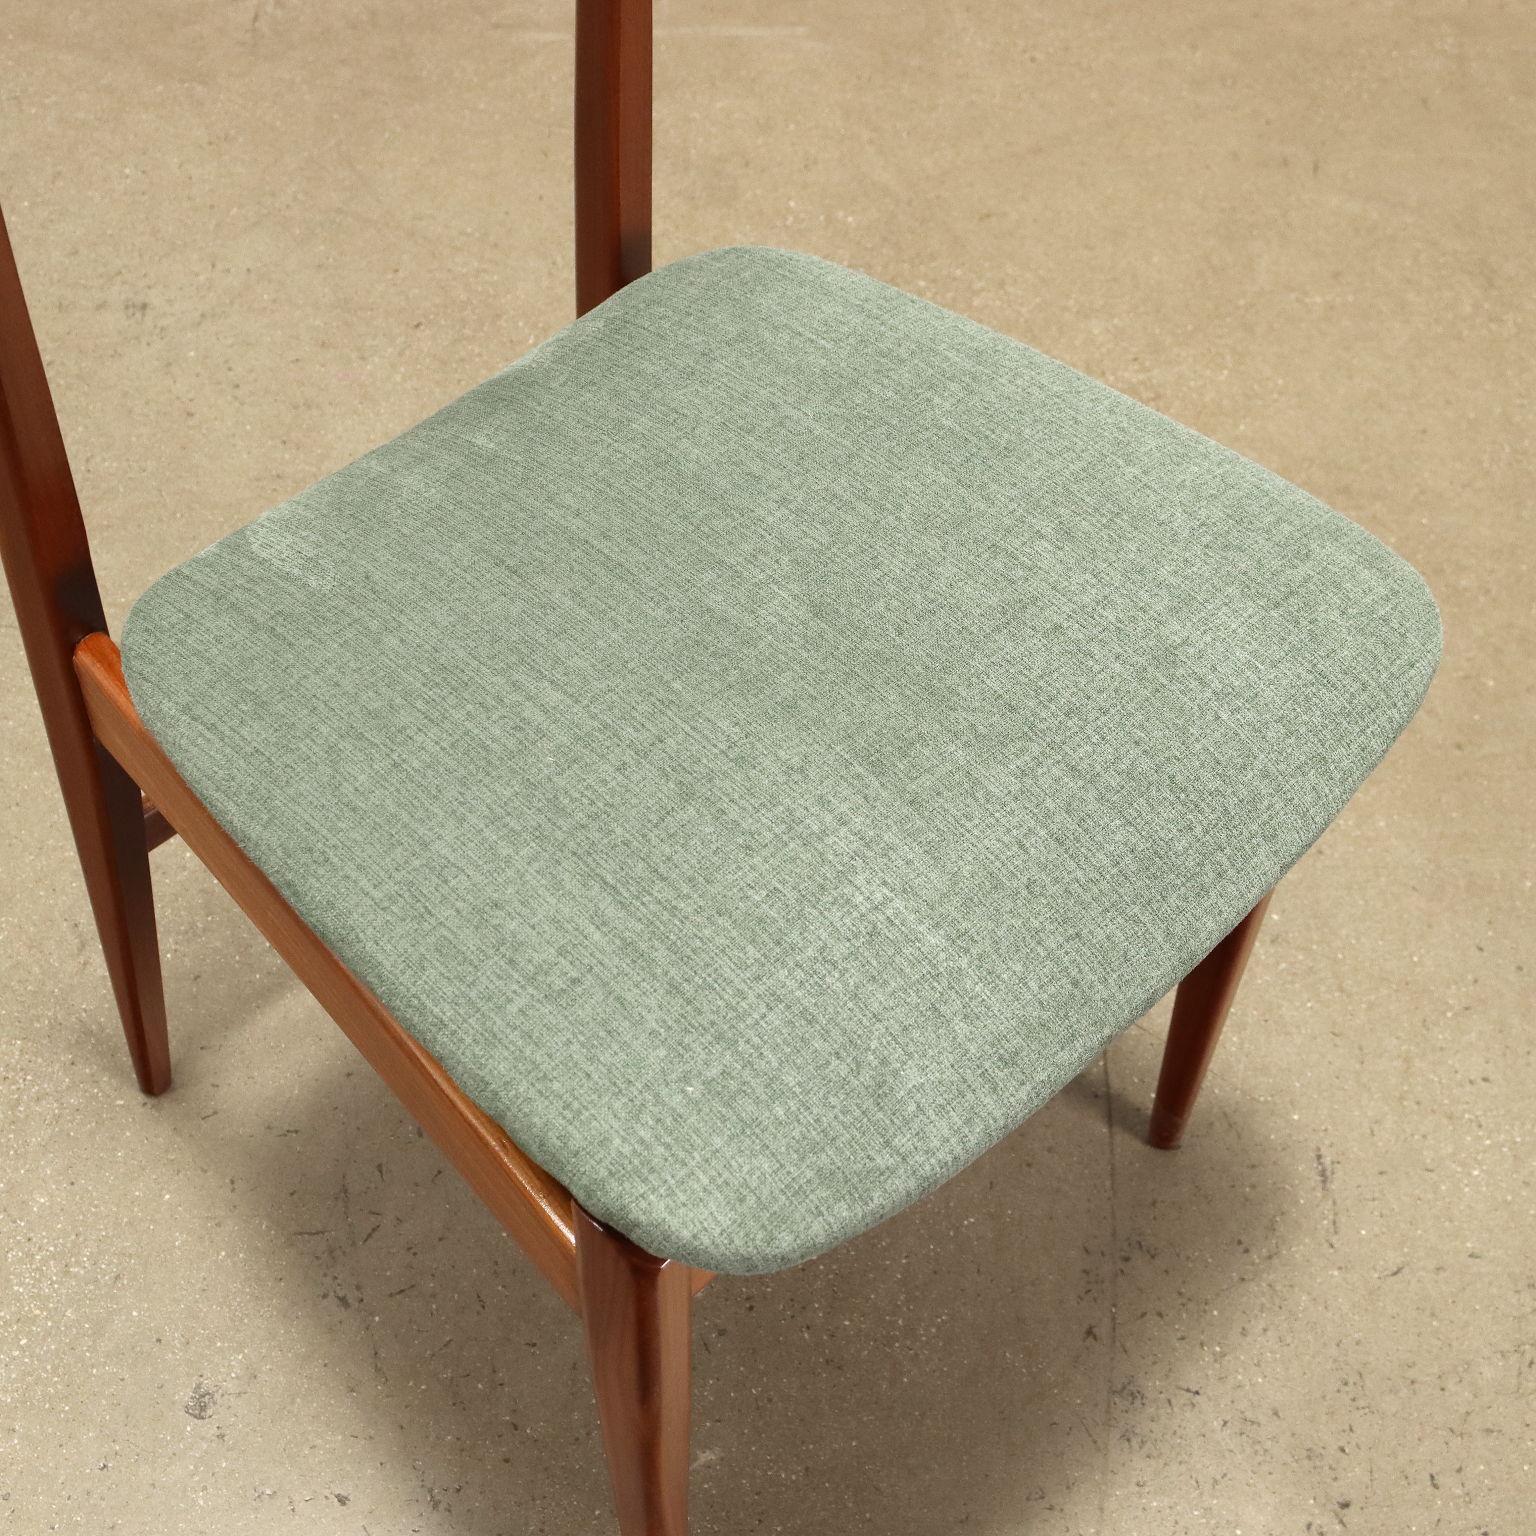 Fabric Group of 4 Wooden Chairs Italy 1950s-1960s